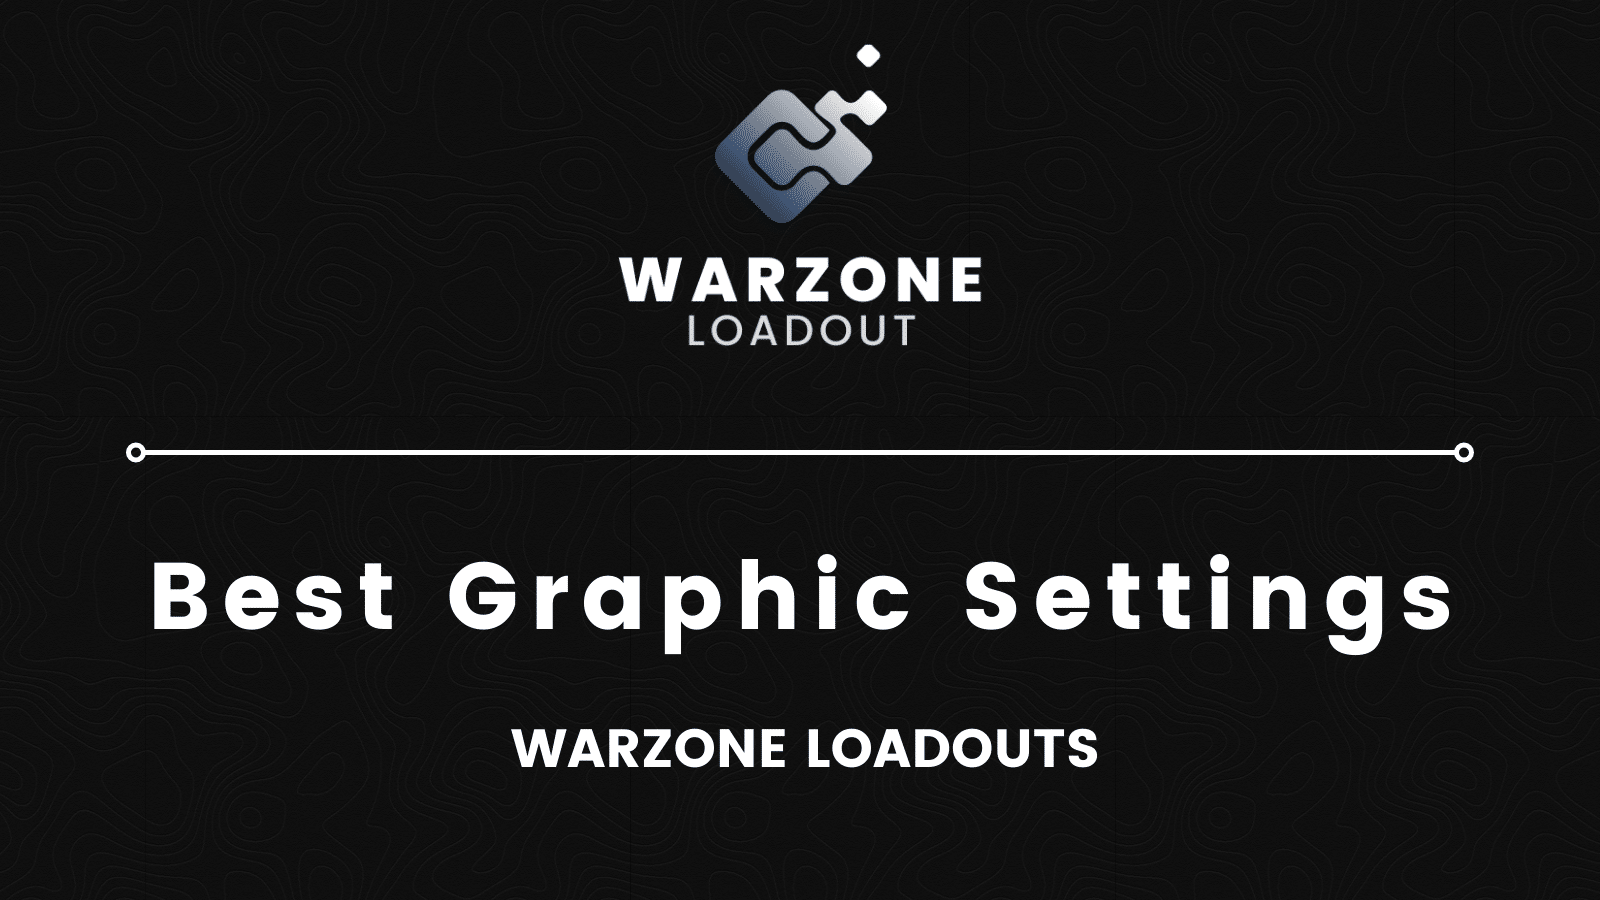 The best graphic settings for Warzone – Season 4